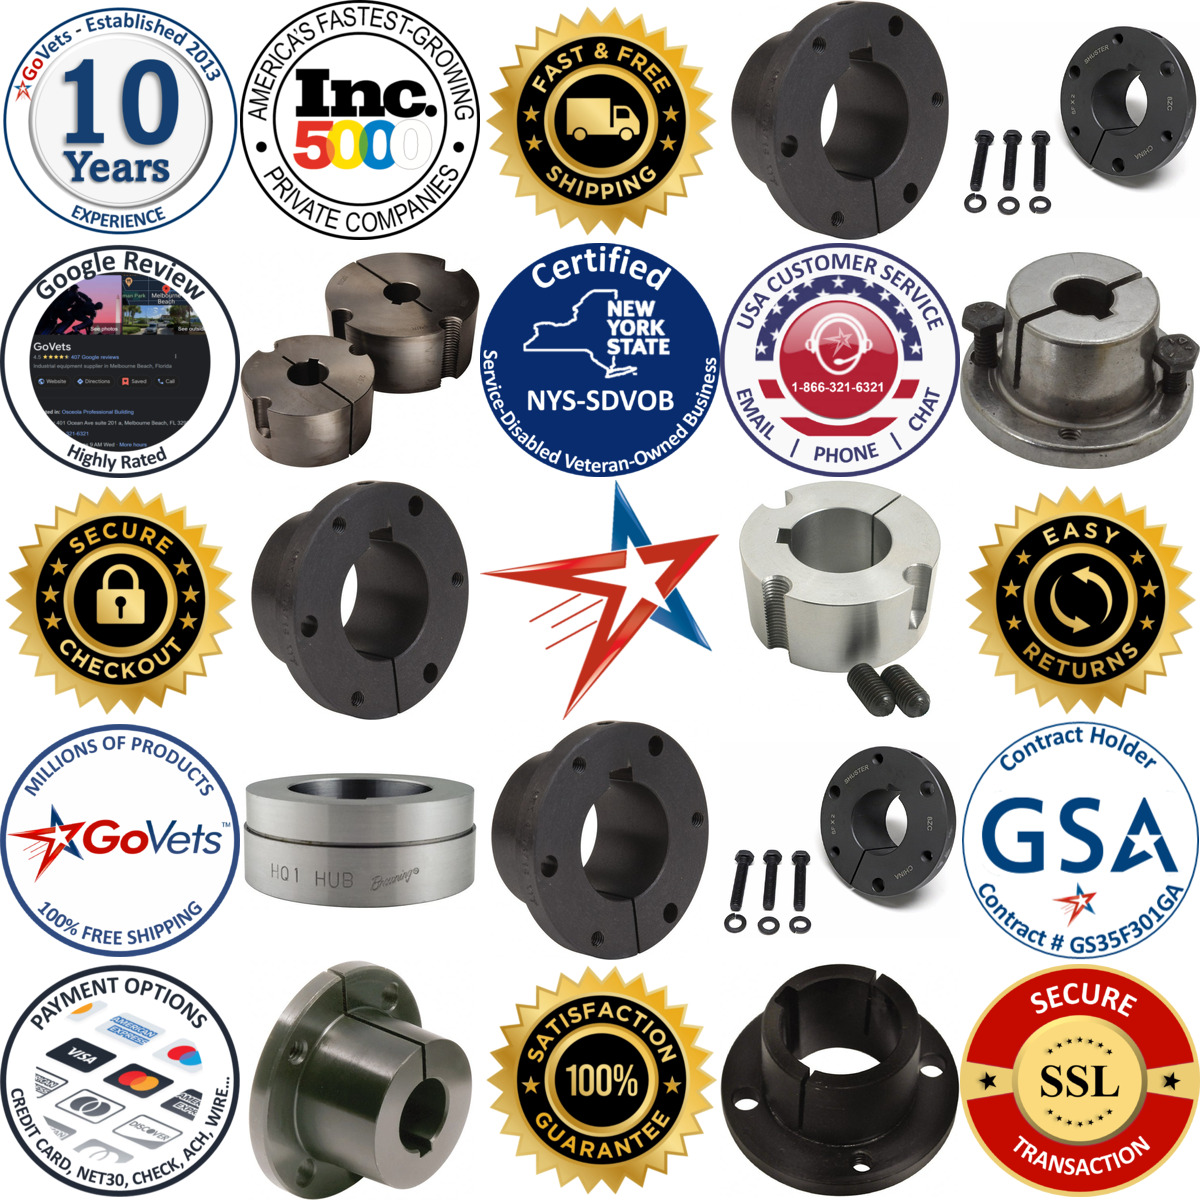 A selection of Sprocket Bushings products on GoVets